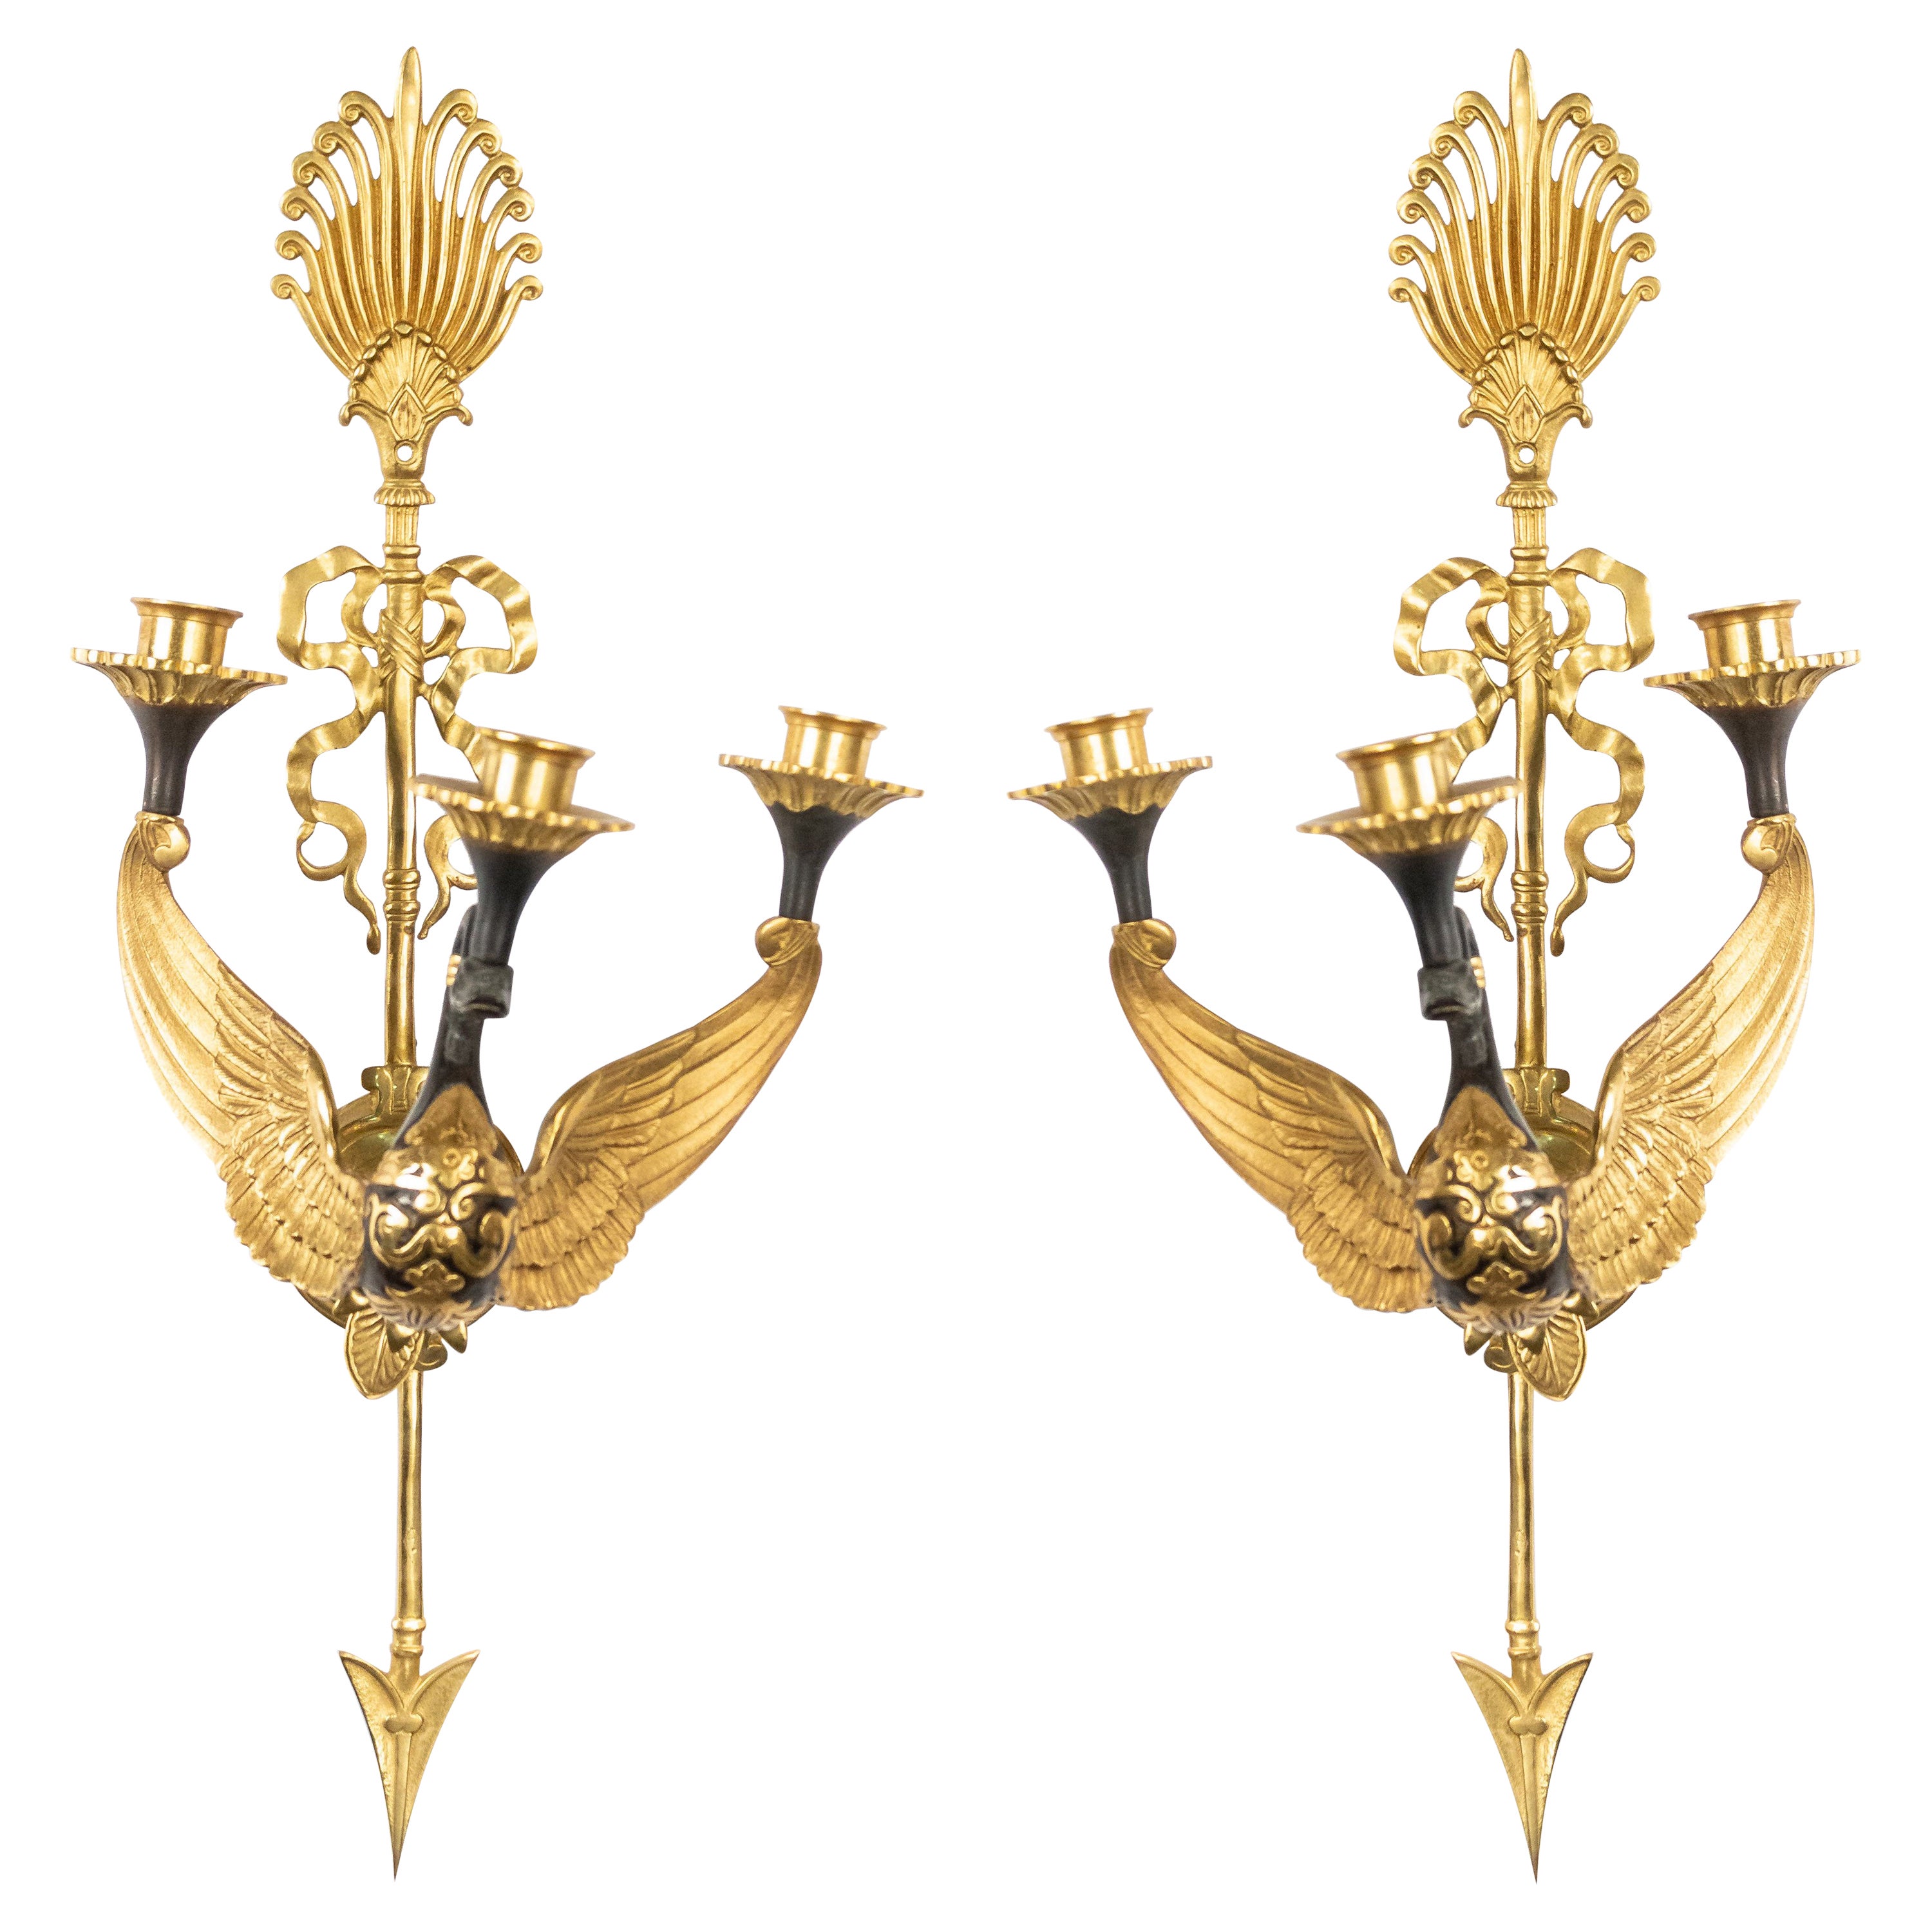 Four Russian Neoclassic Style Ormolu and Bronze Swan Wall Sconces For Sale